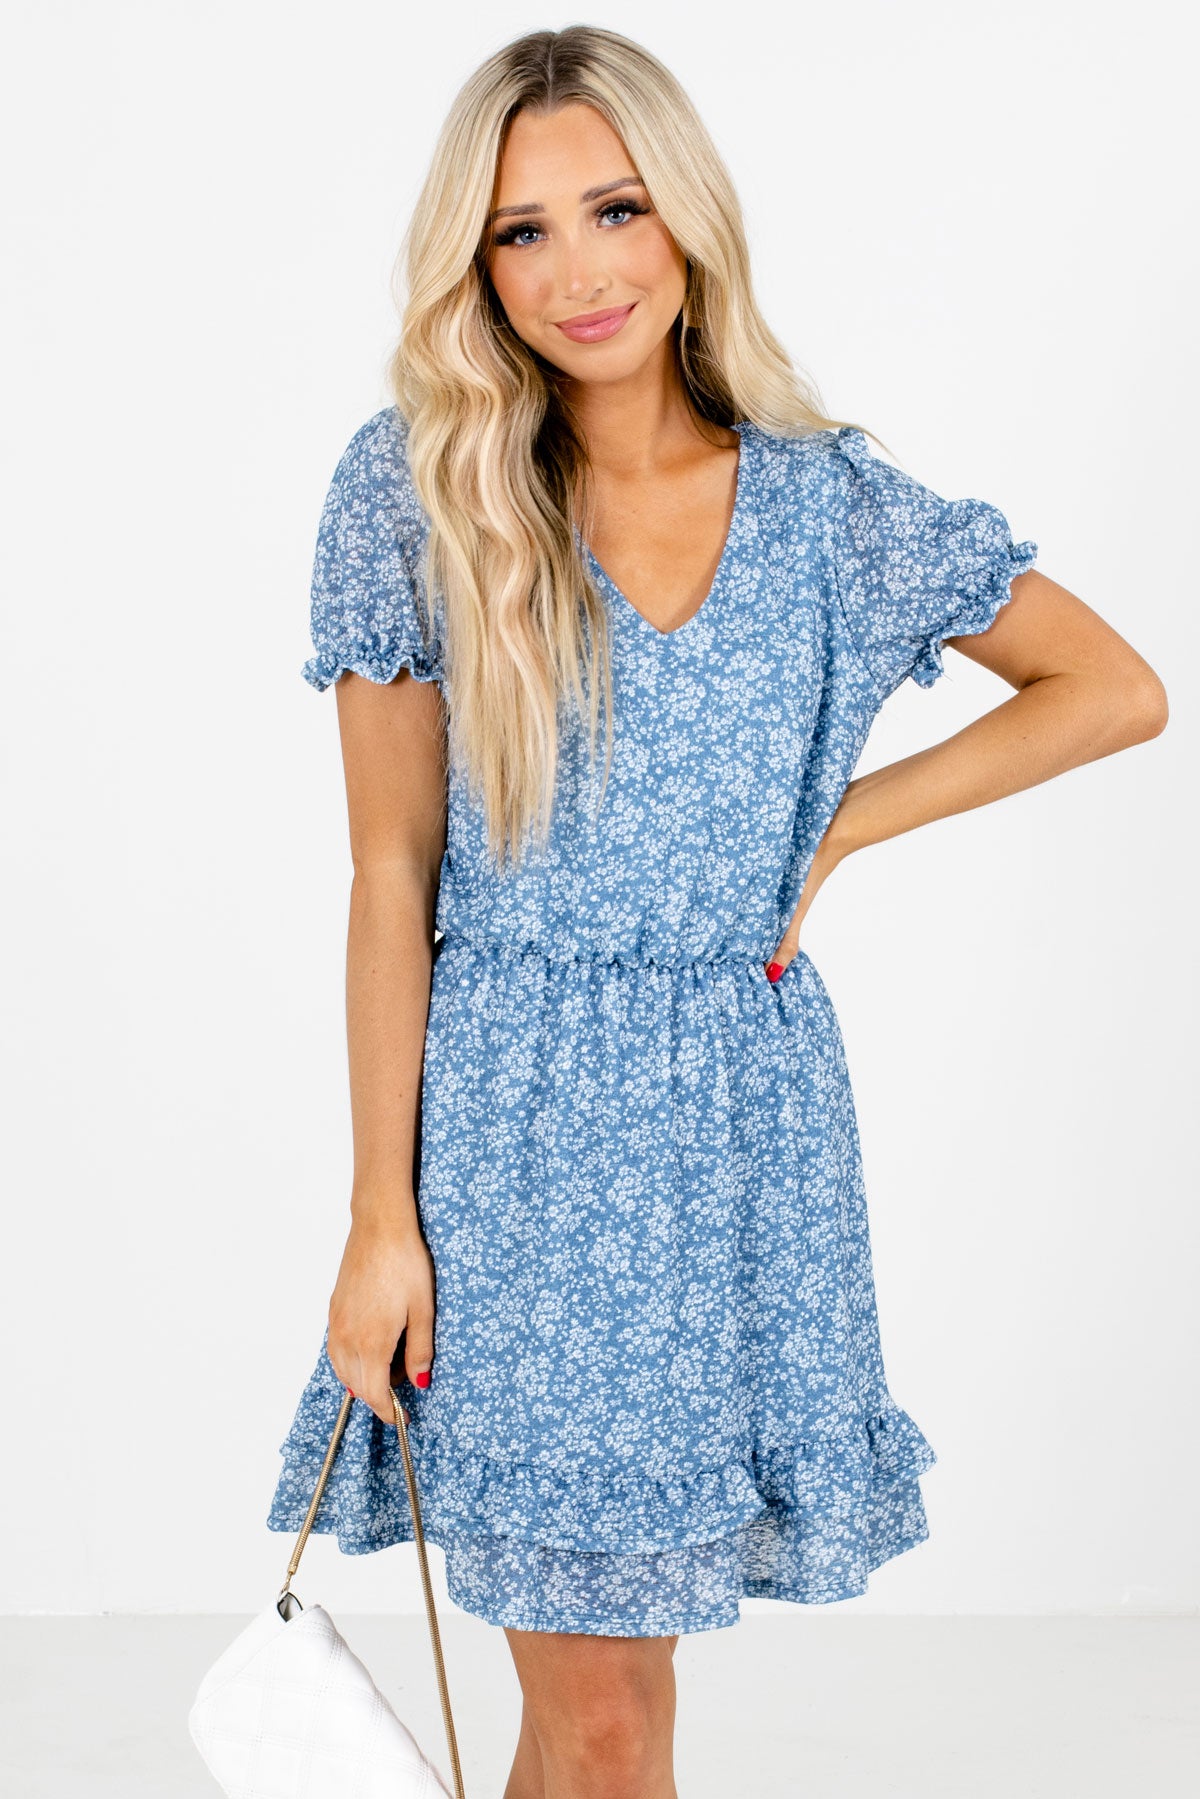 Blue Ruffle Accented Boutique Mini Dresses for Women